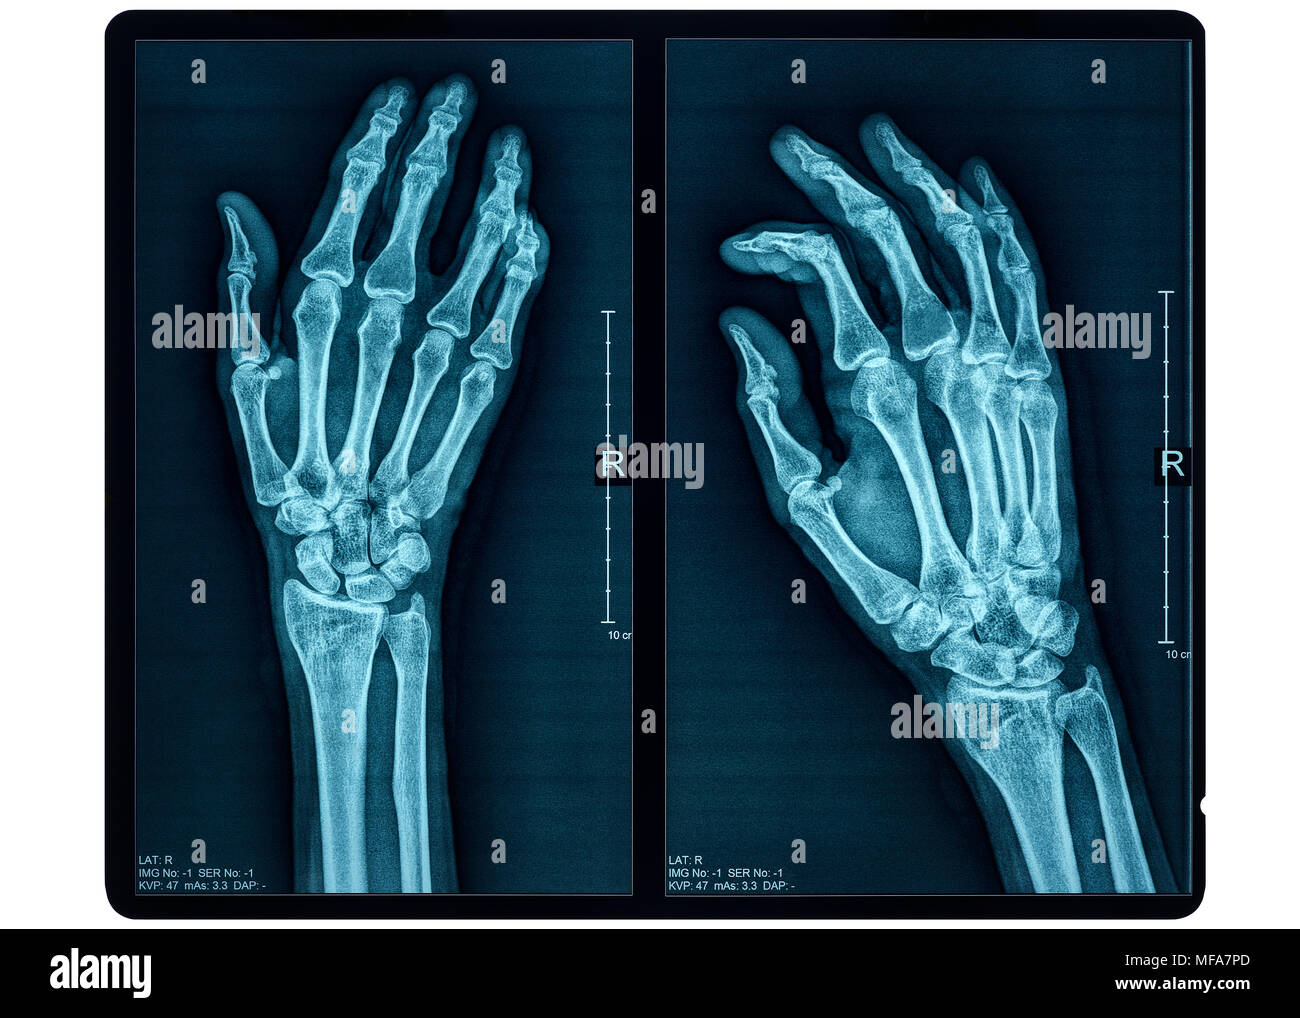 Hand X-ray of an Adult Female Stock Photo